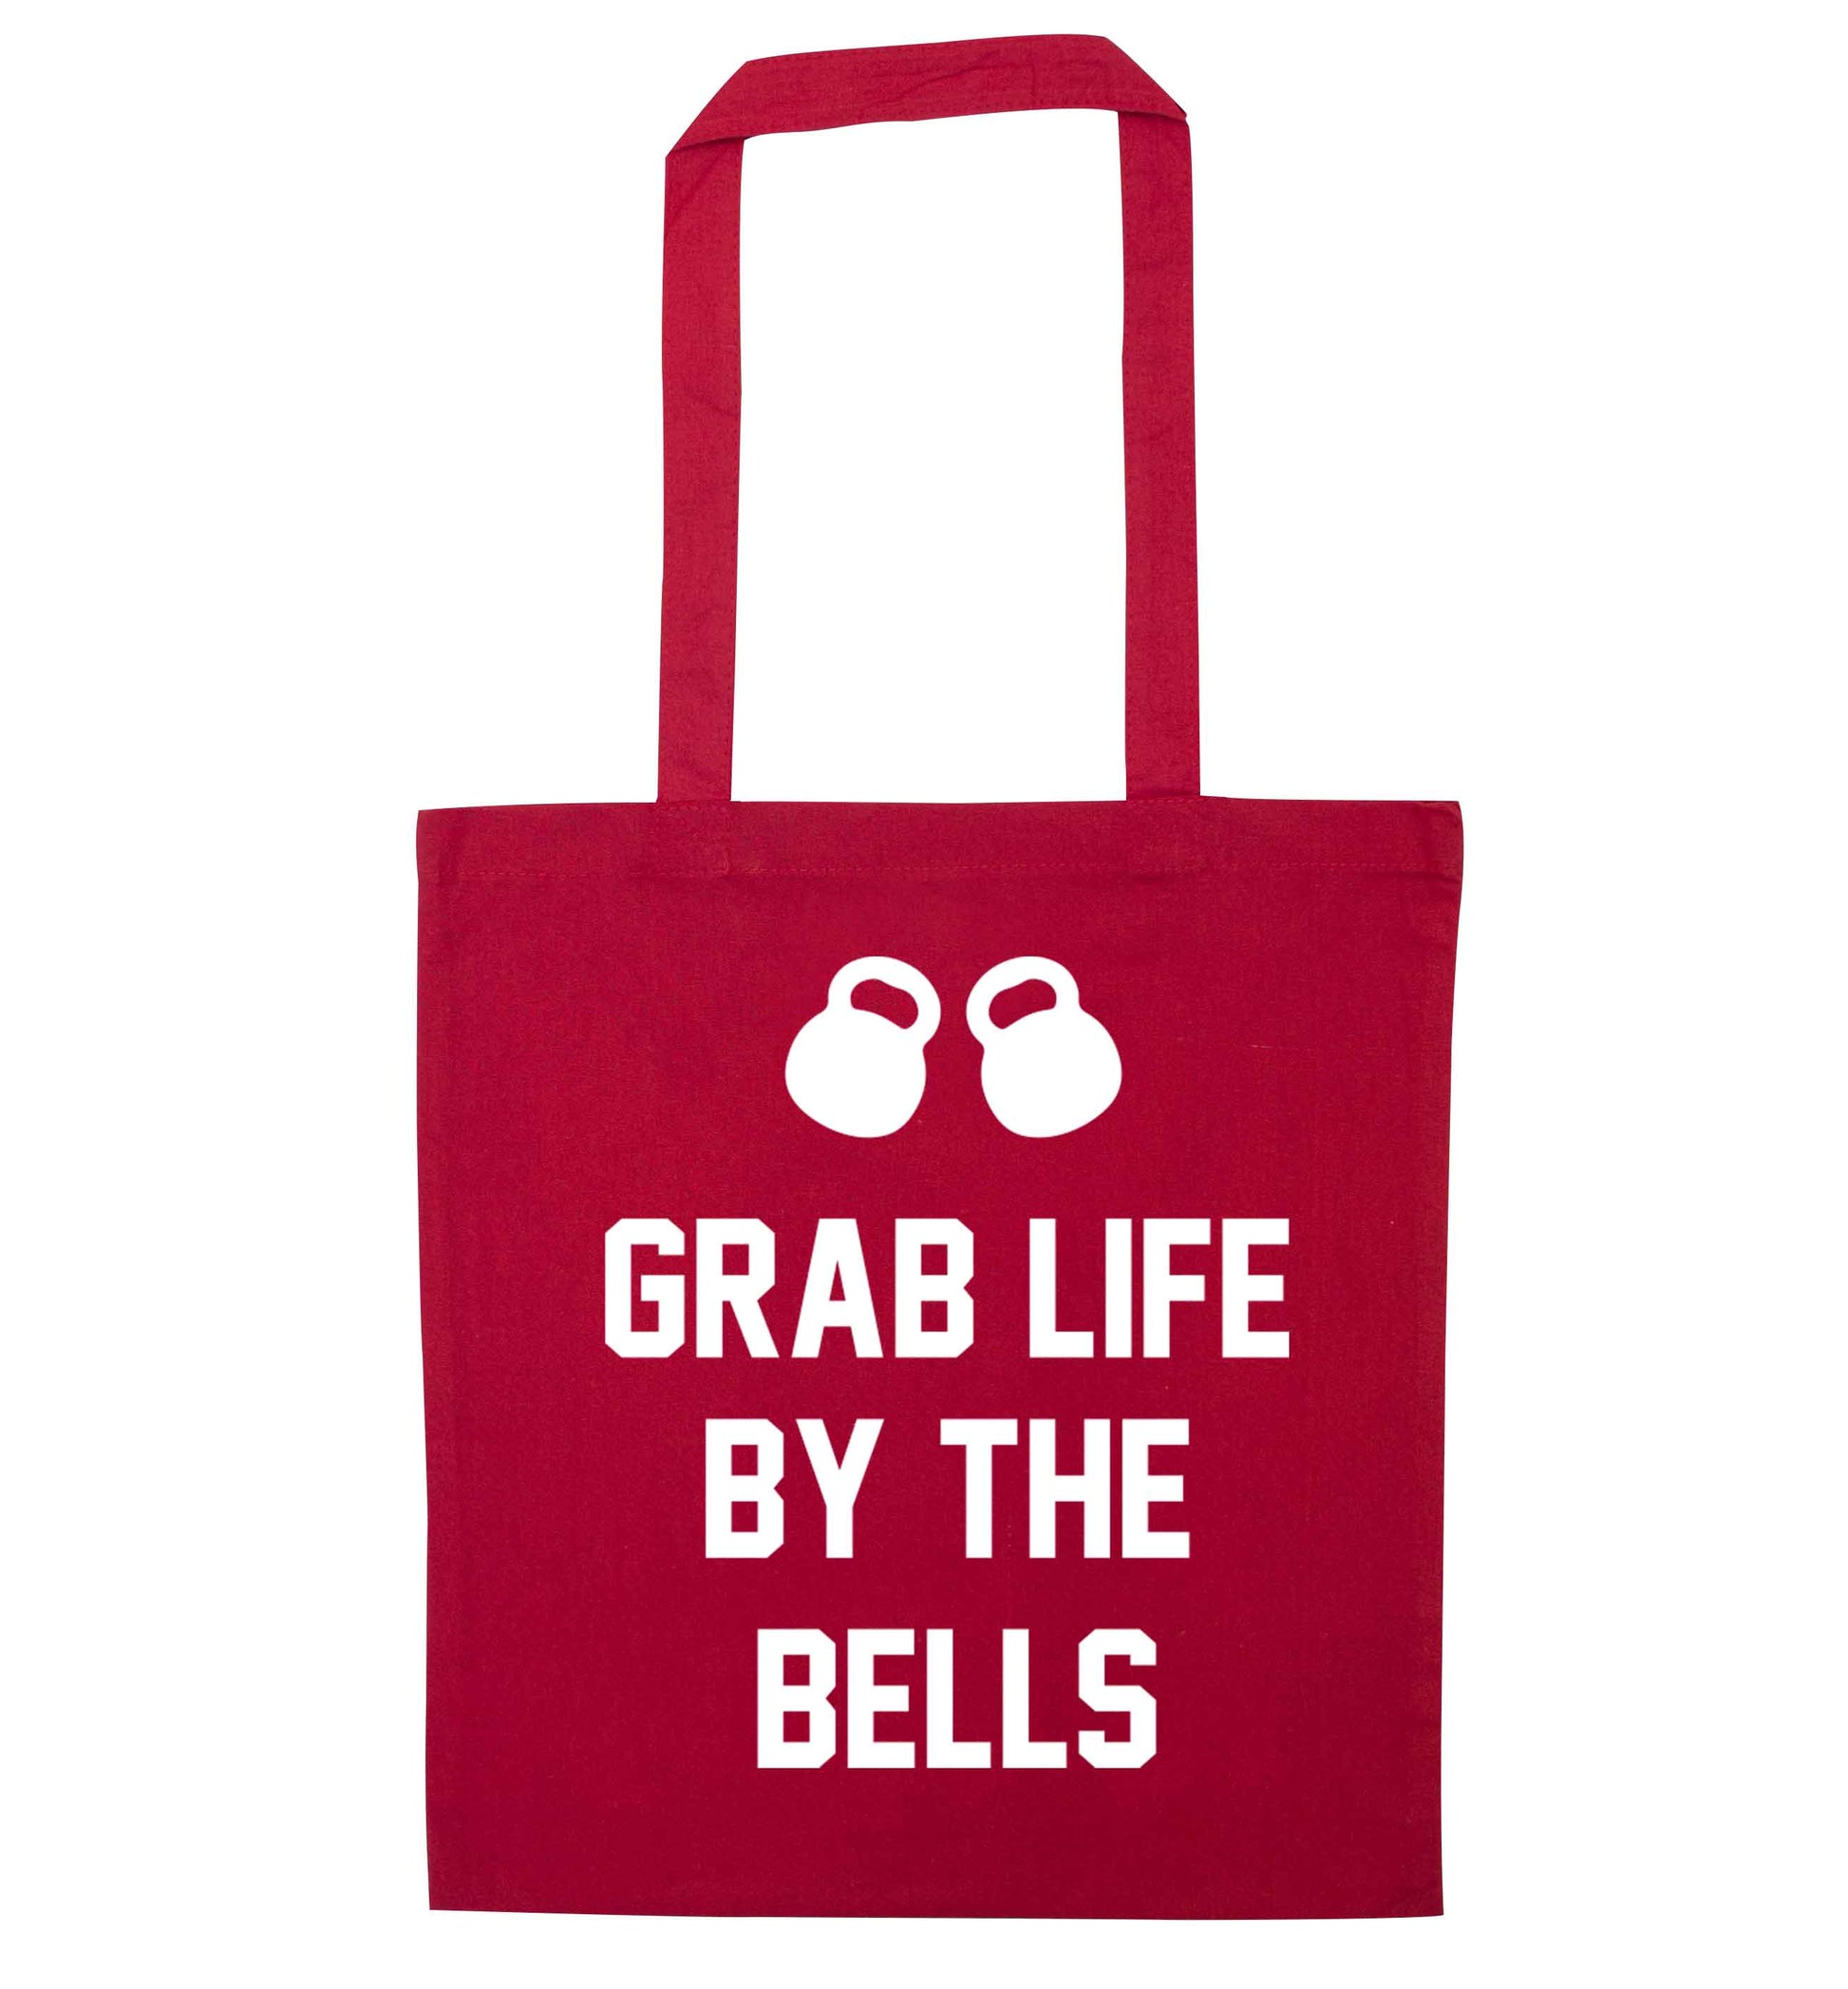 Grab life by the bells red tote bag